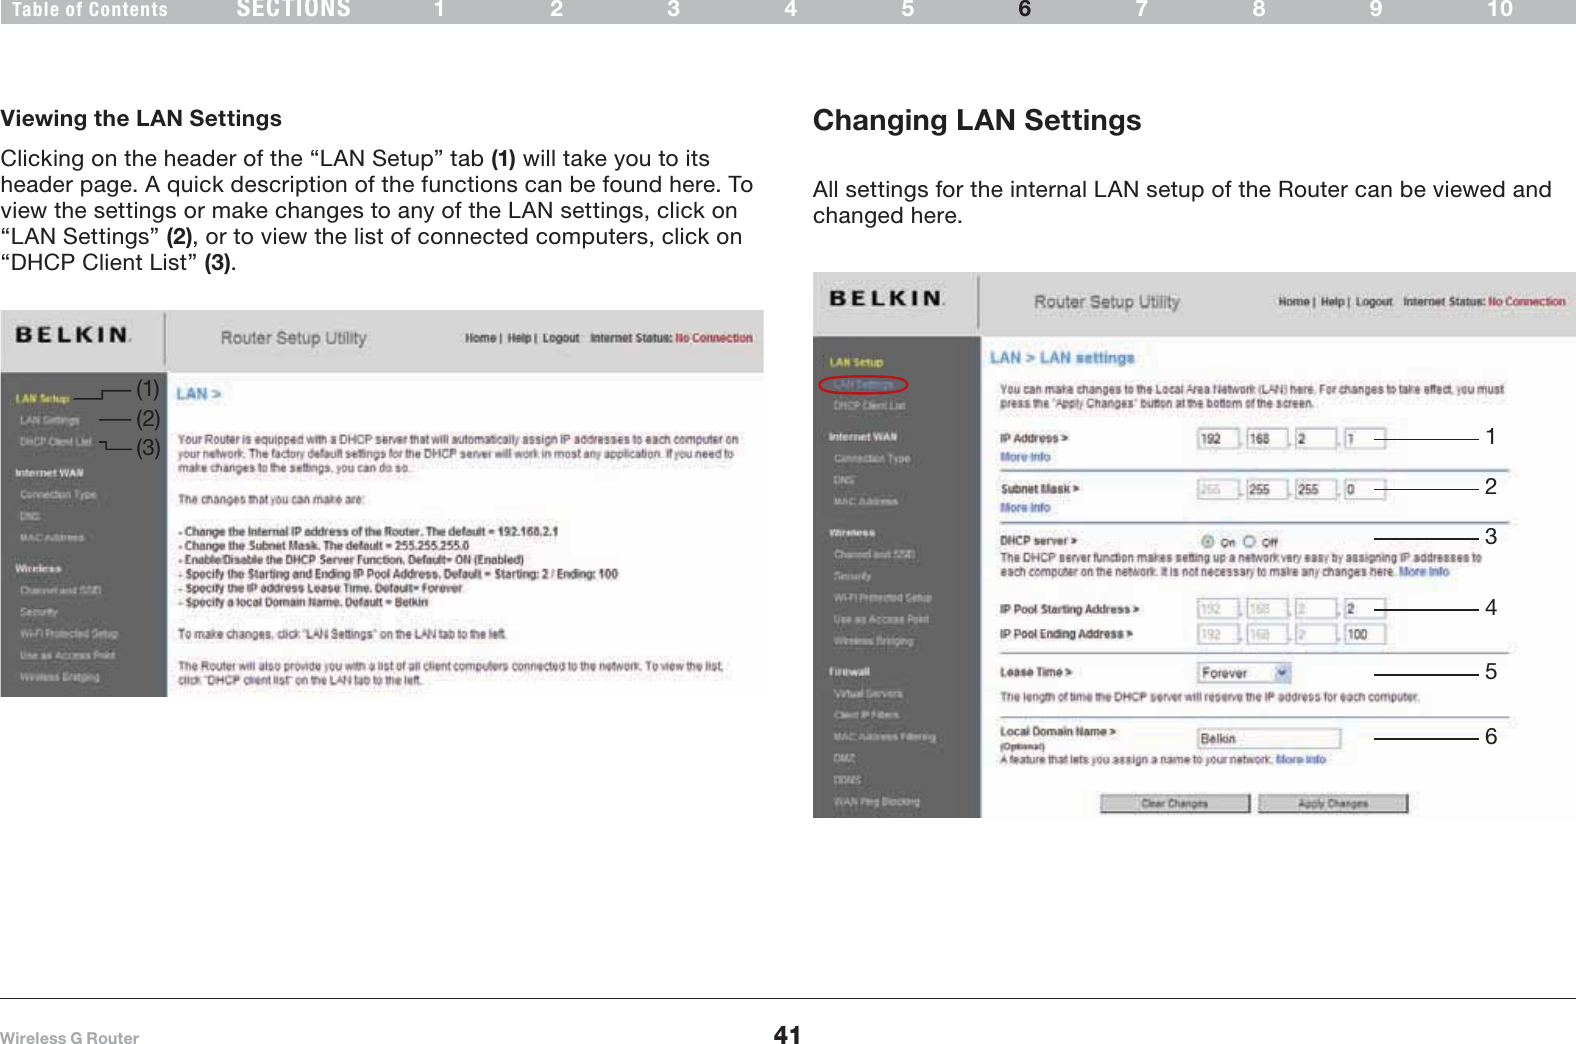 41Wireless G RouterSECTIONSTable of Contents 12345 789106USING THE WEB-BASED ADVANCED USER INTERFACEChanging LAN SettingsAll settings for the internal LAN setup of the Router can be viewed and changed here.Viewing the LAN SettingsClicking on the header of the “LAN Setup” tab (1) will take you to its header page. A quick description of the functions can be found here. To view the settings or make changes to any of the LAN settings, click on “LAN Settings” (2), or to view the list of connected computers, click on “DHCP Client List” (3).(1)(3)(2) 123456